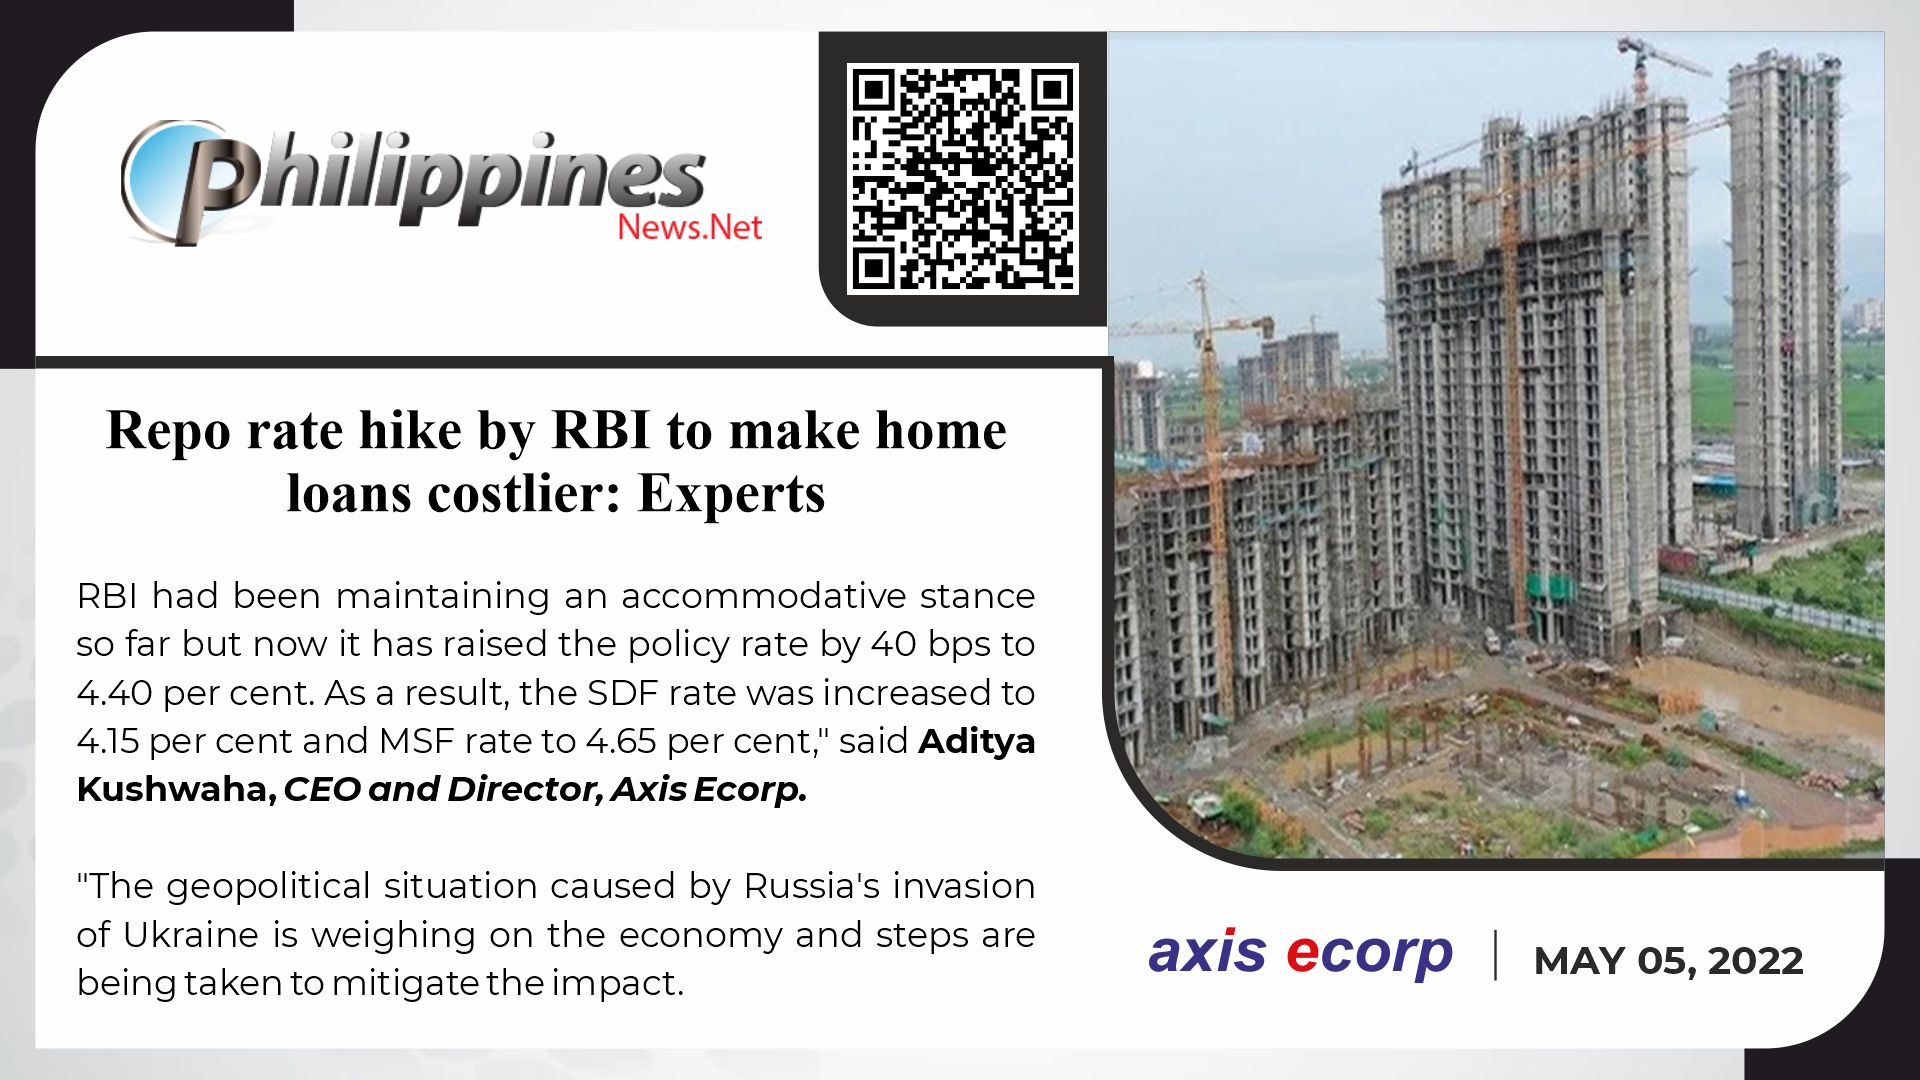 Repo Rate Hike By RBI To Make Home Loans Costlier